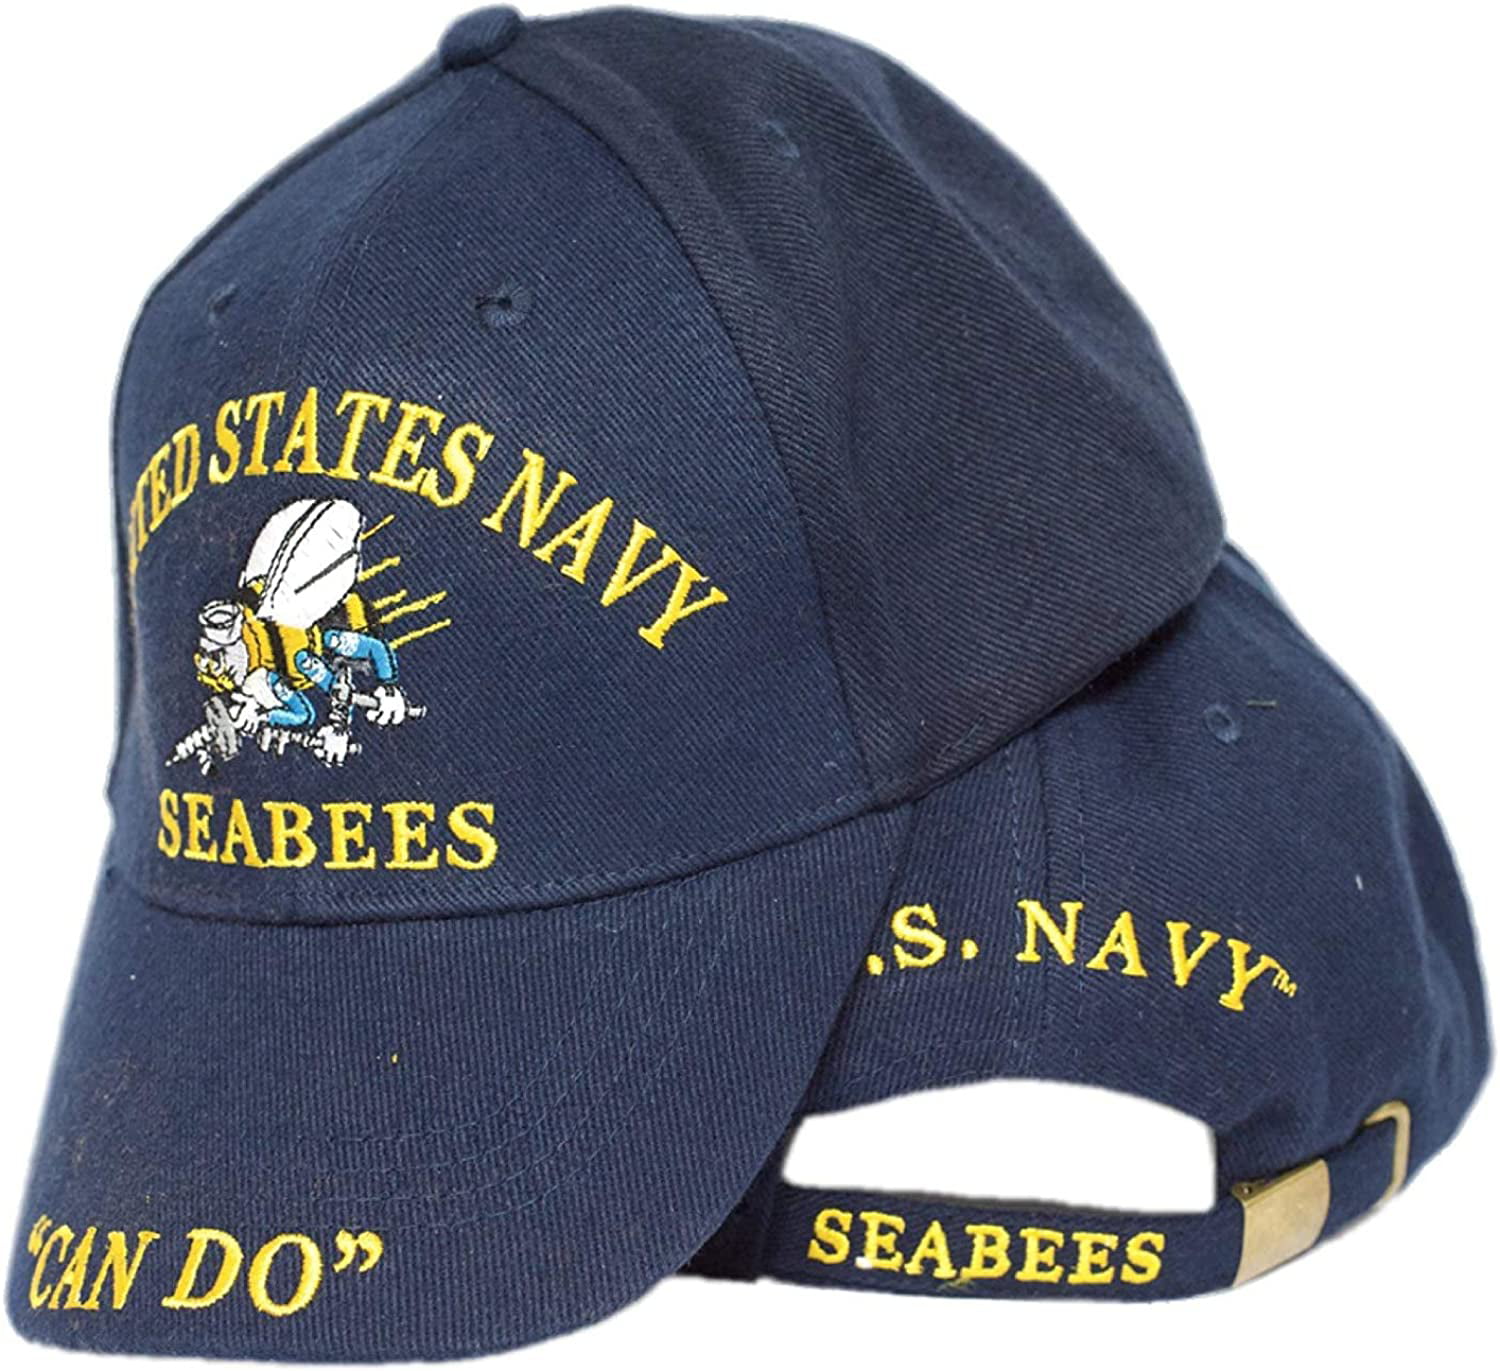 US NAVY Baseball Cap Blue Quality Embroidered Hat Adjustable Strap Naval Seabees 